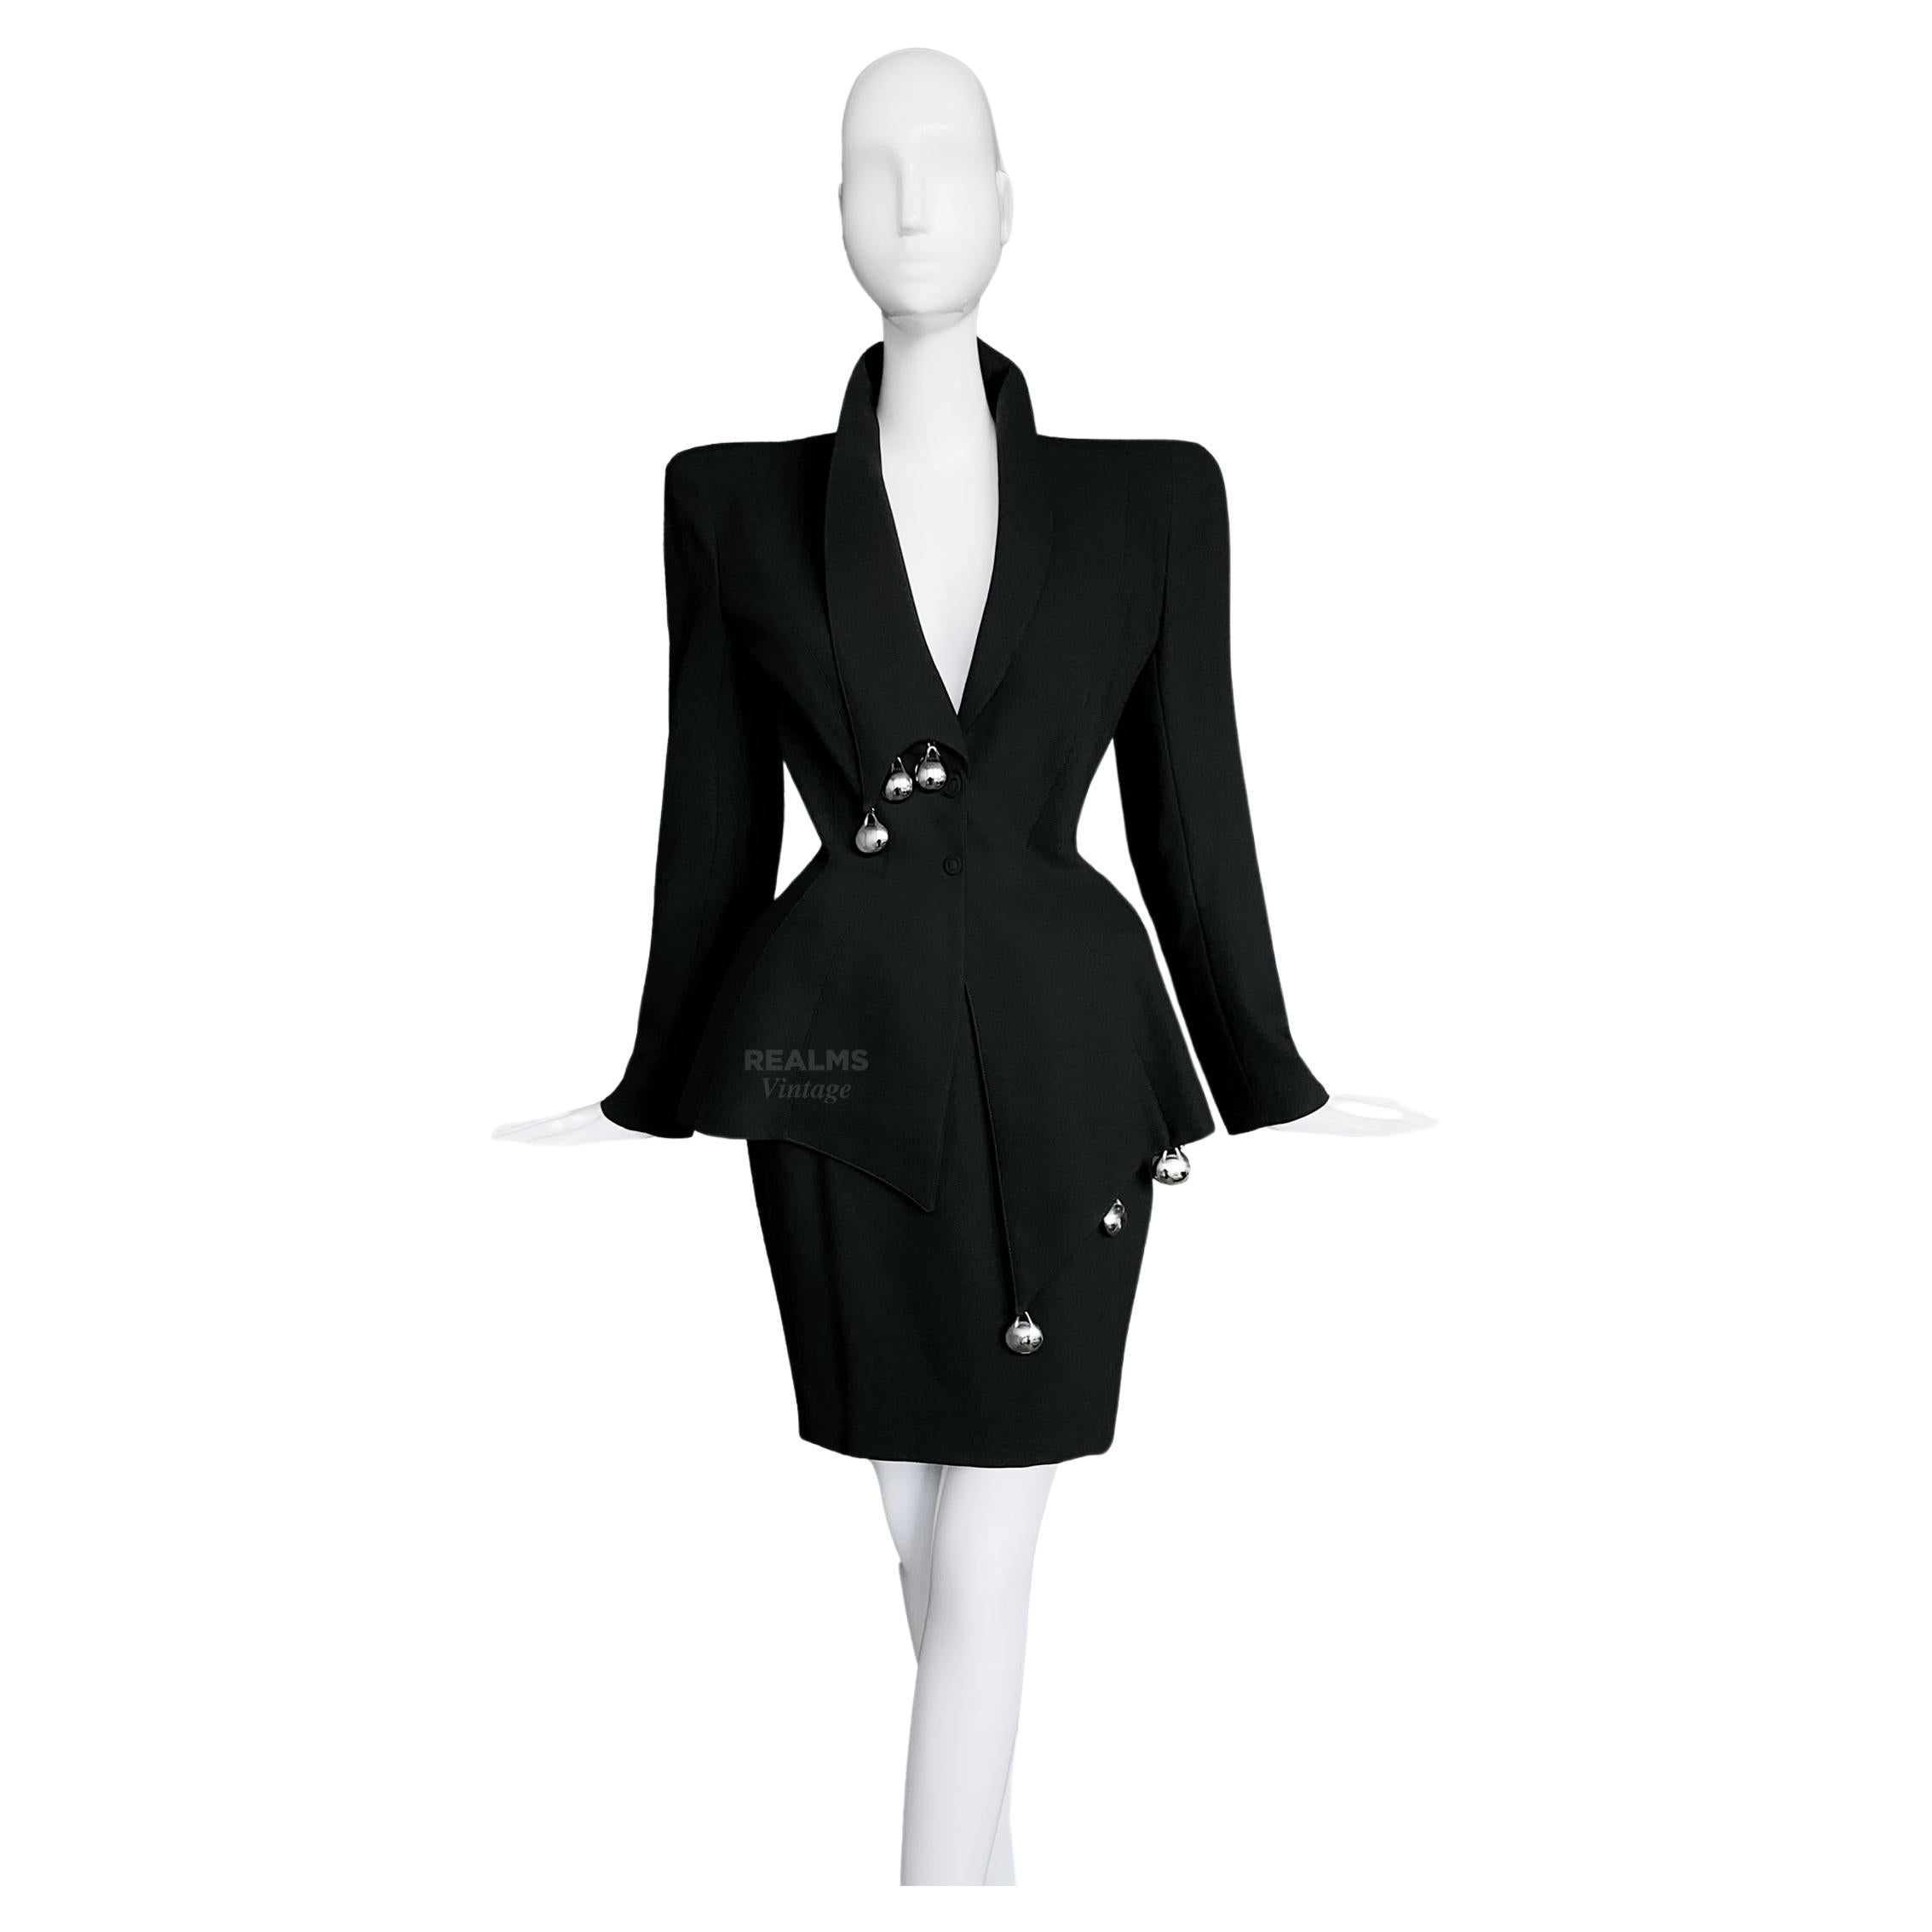 Thierry Mugler SS1998 Black Skirt Suit Dramatic Silver Metal Jacket Skirt For Sale